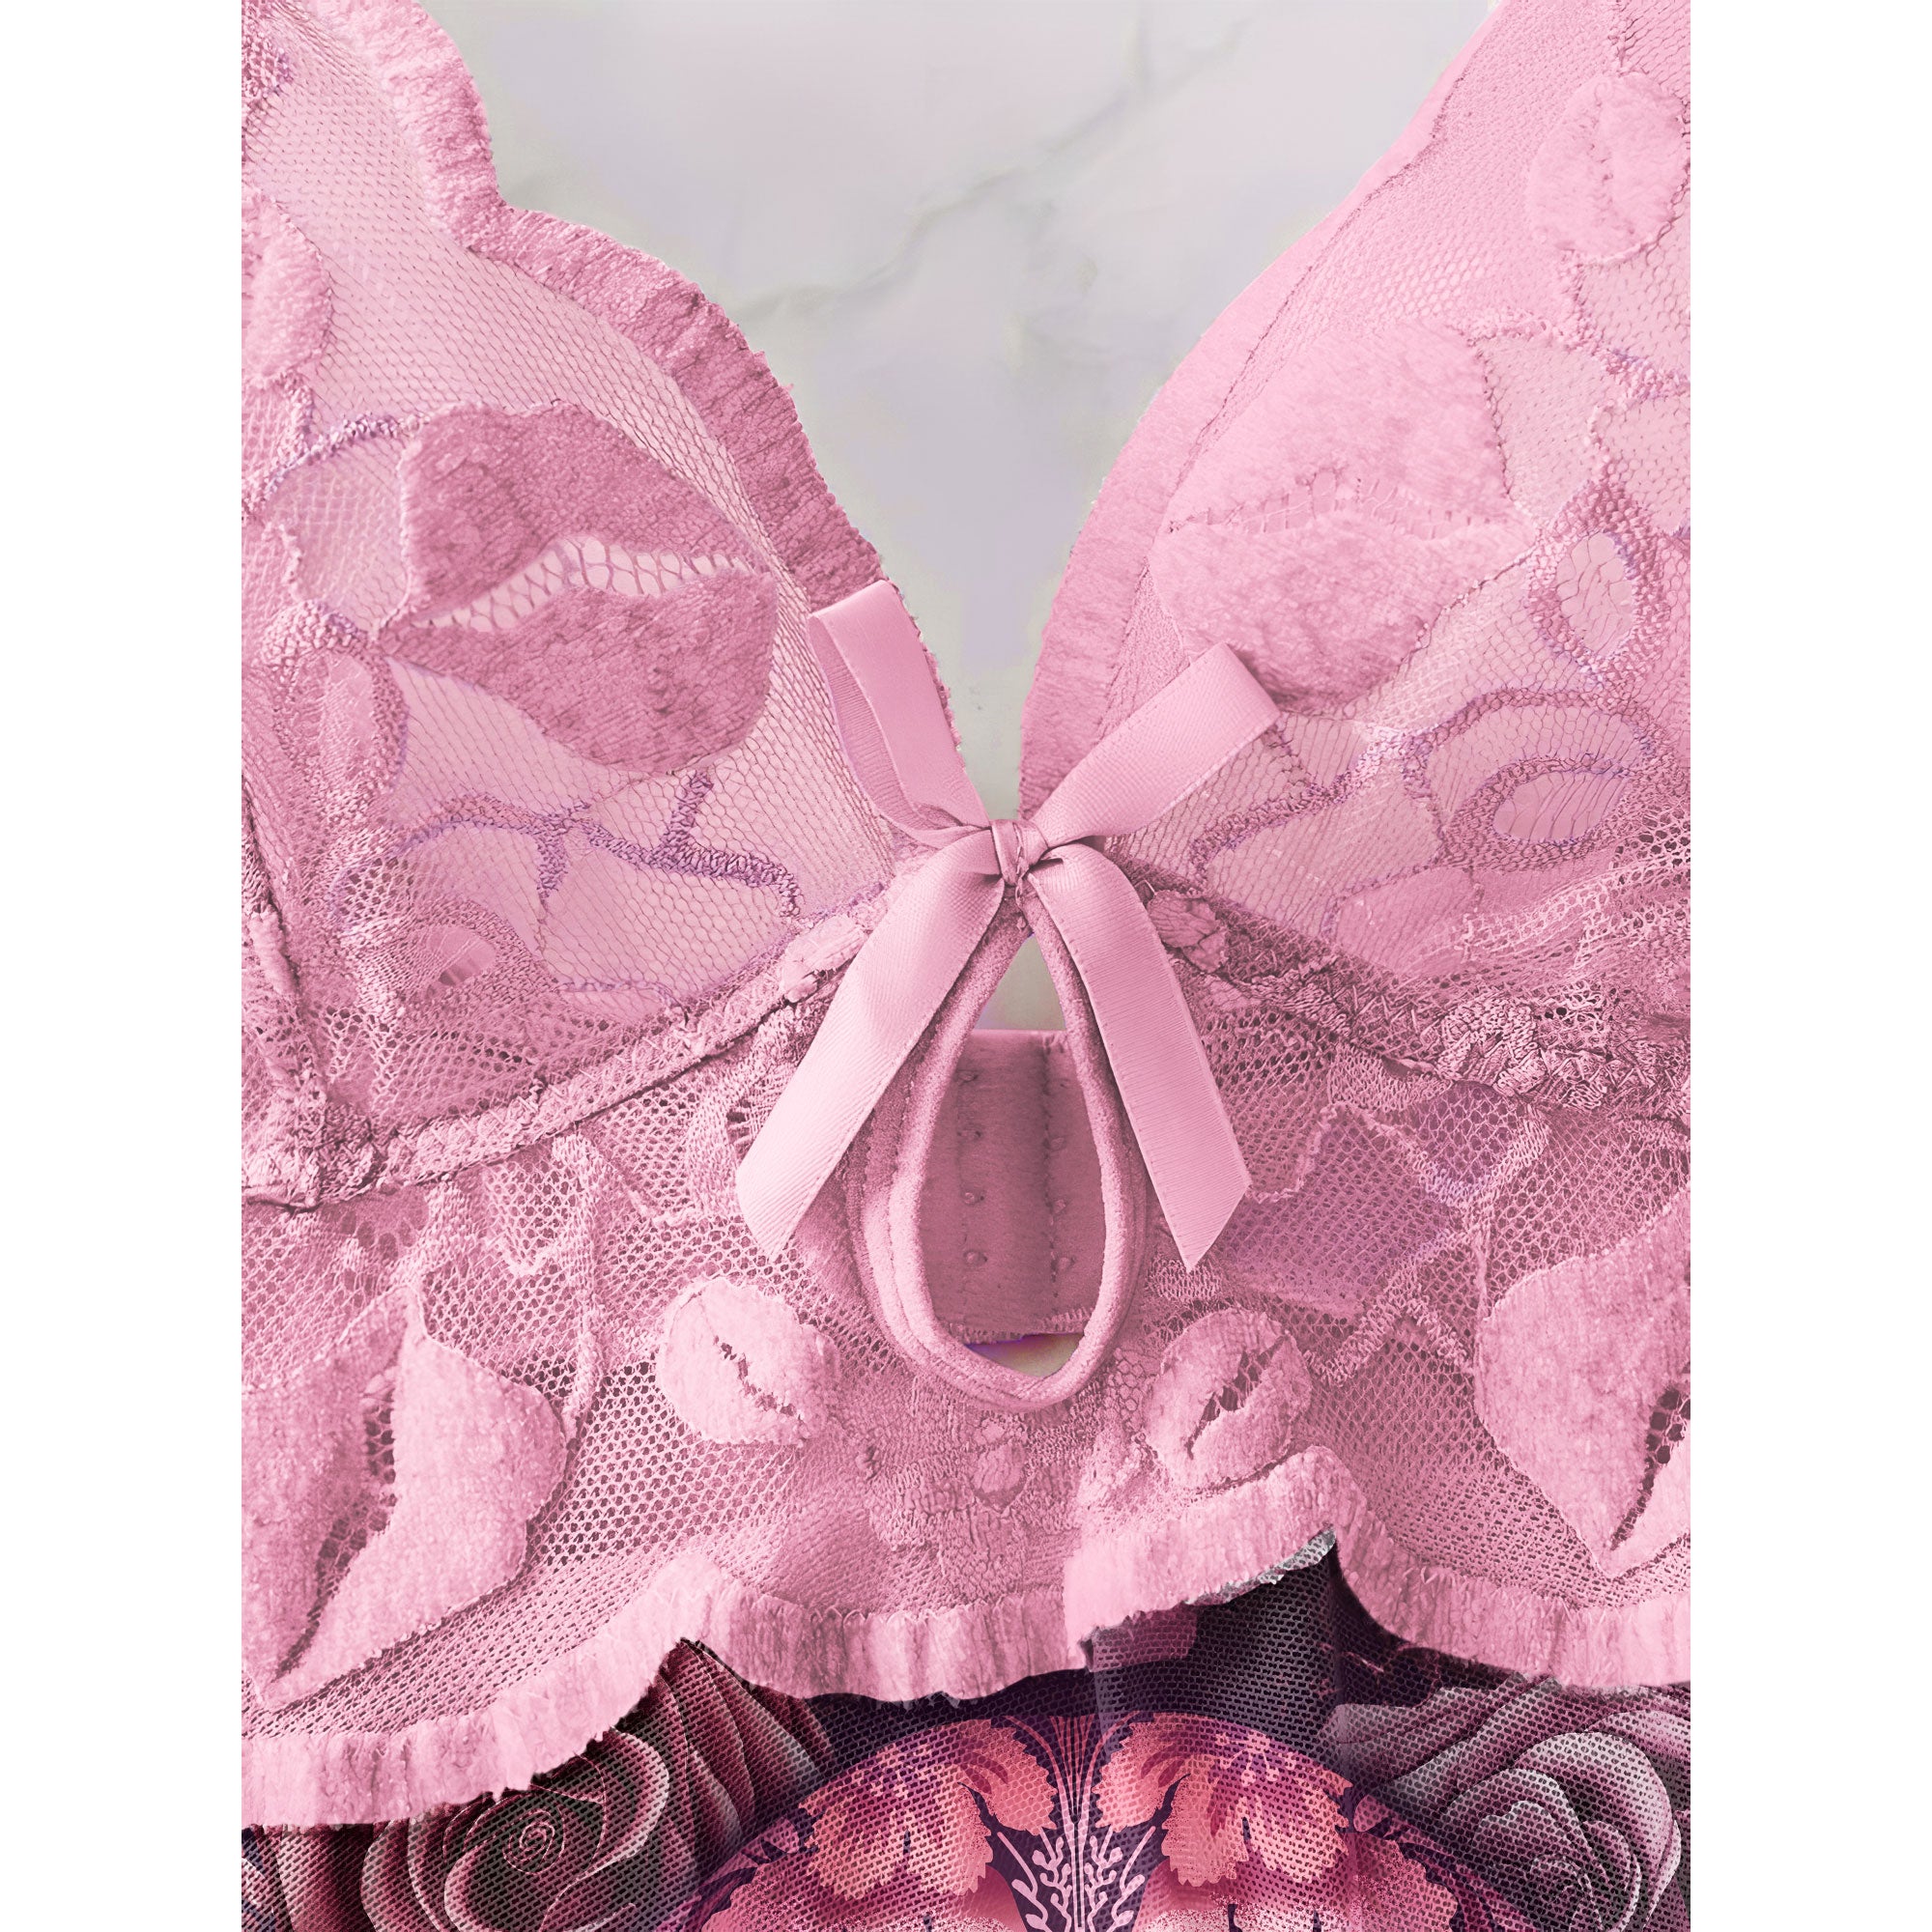 New Lace Babydoll Panty Set, Pink Lingerie,  Skull Floral Nightgowns For Women